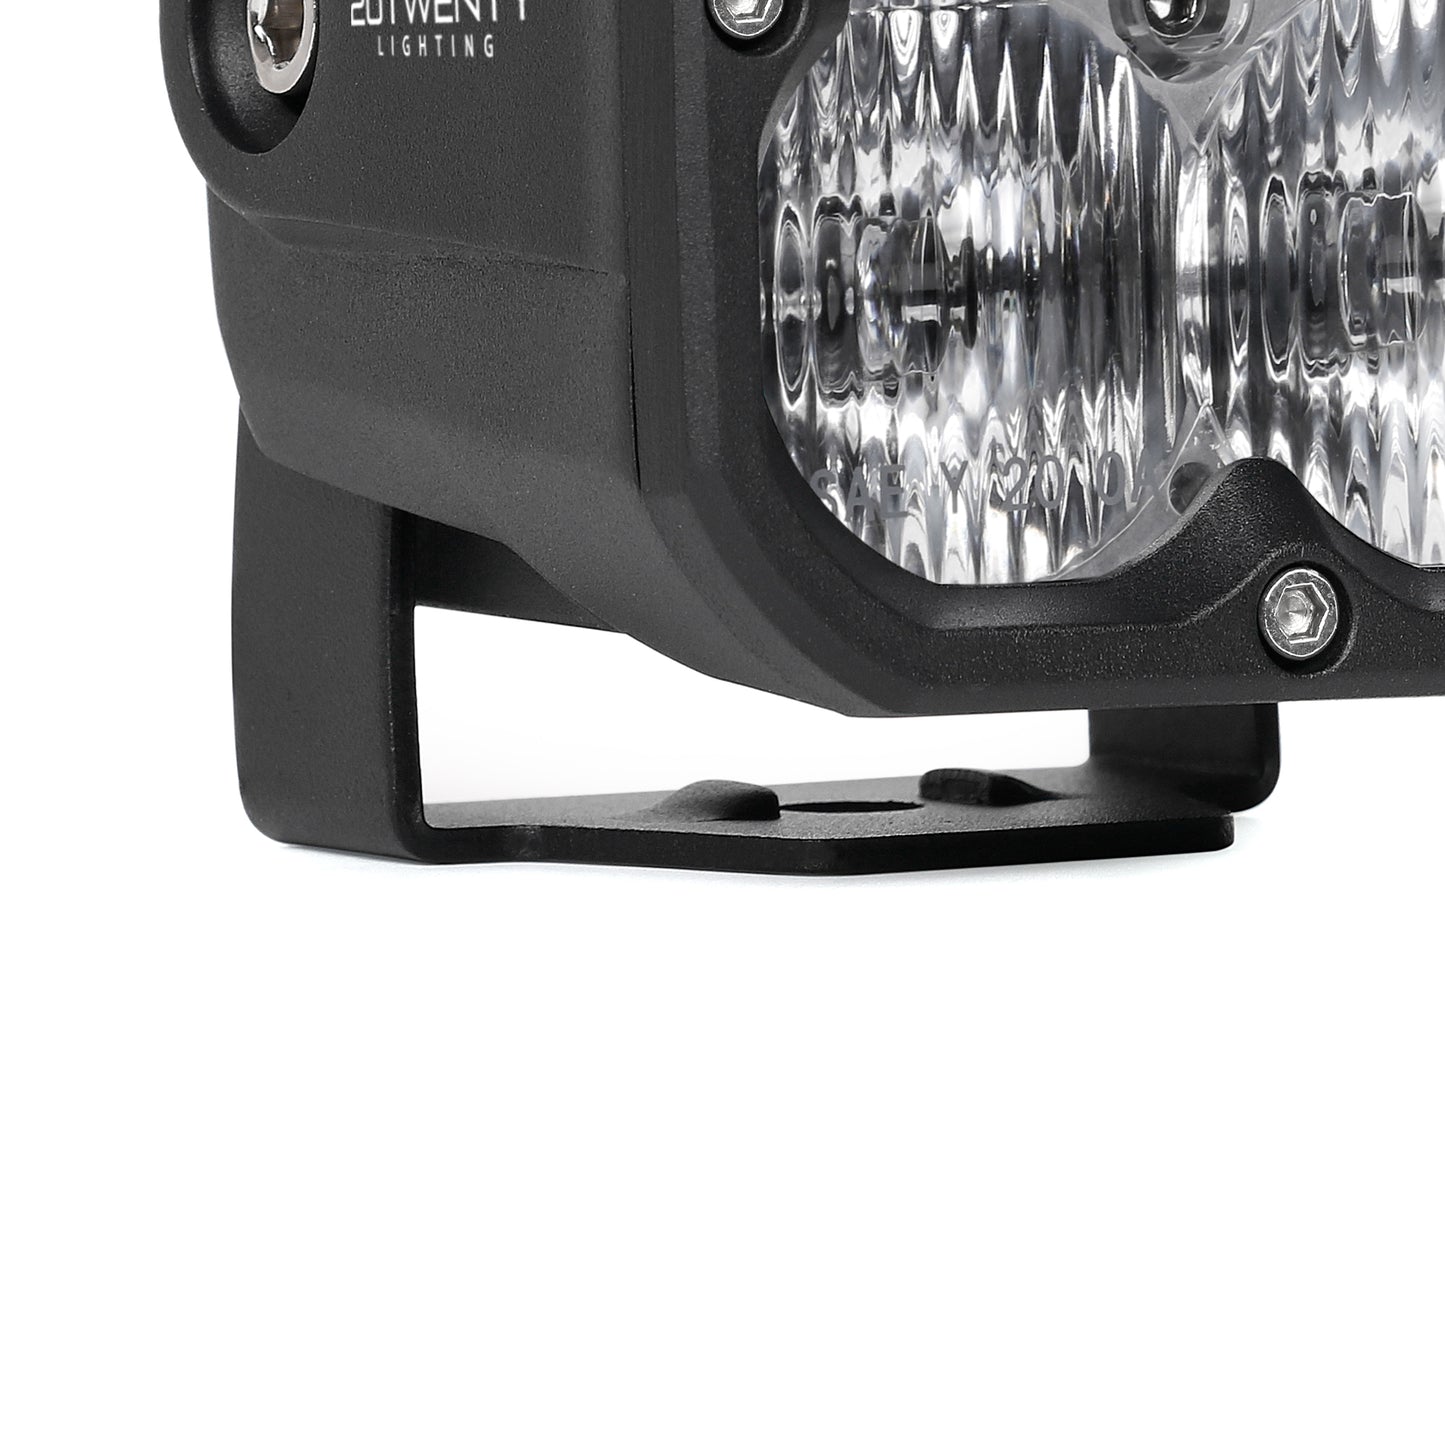 Orion 3" Square White Driving Light Pair with Amber Backlight